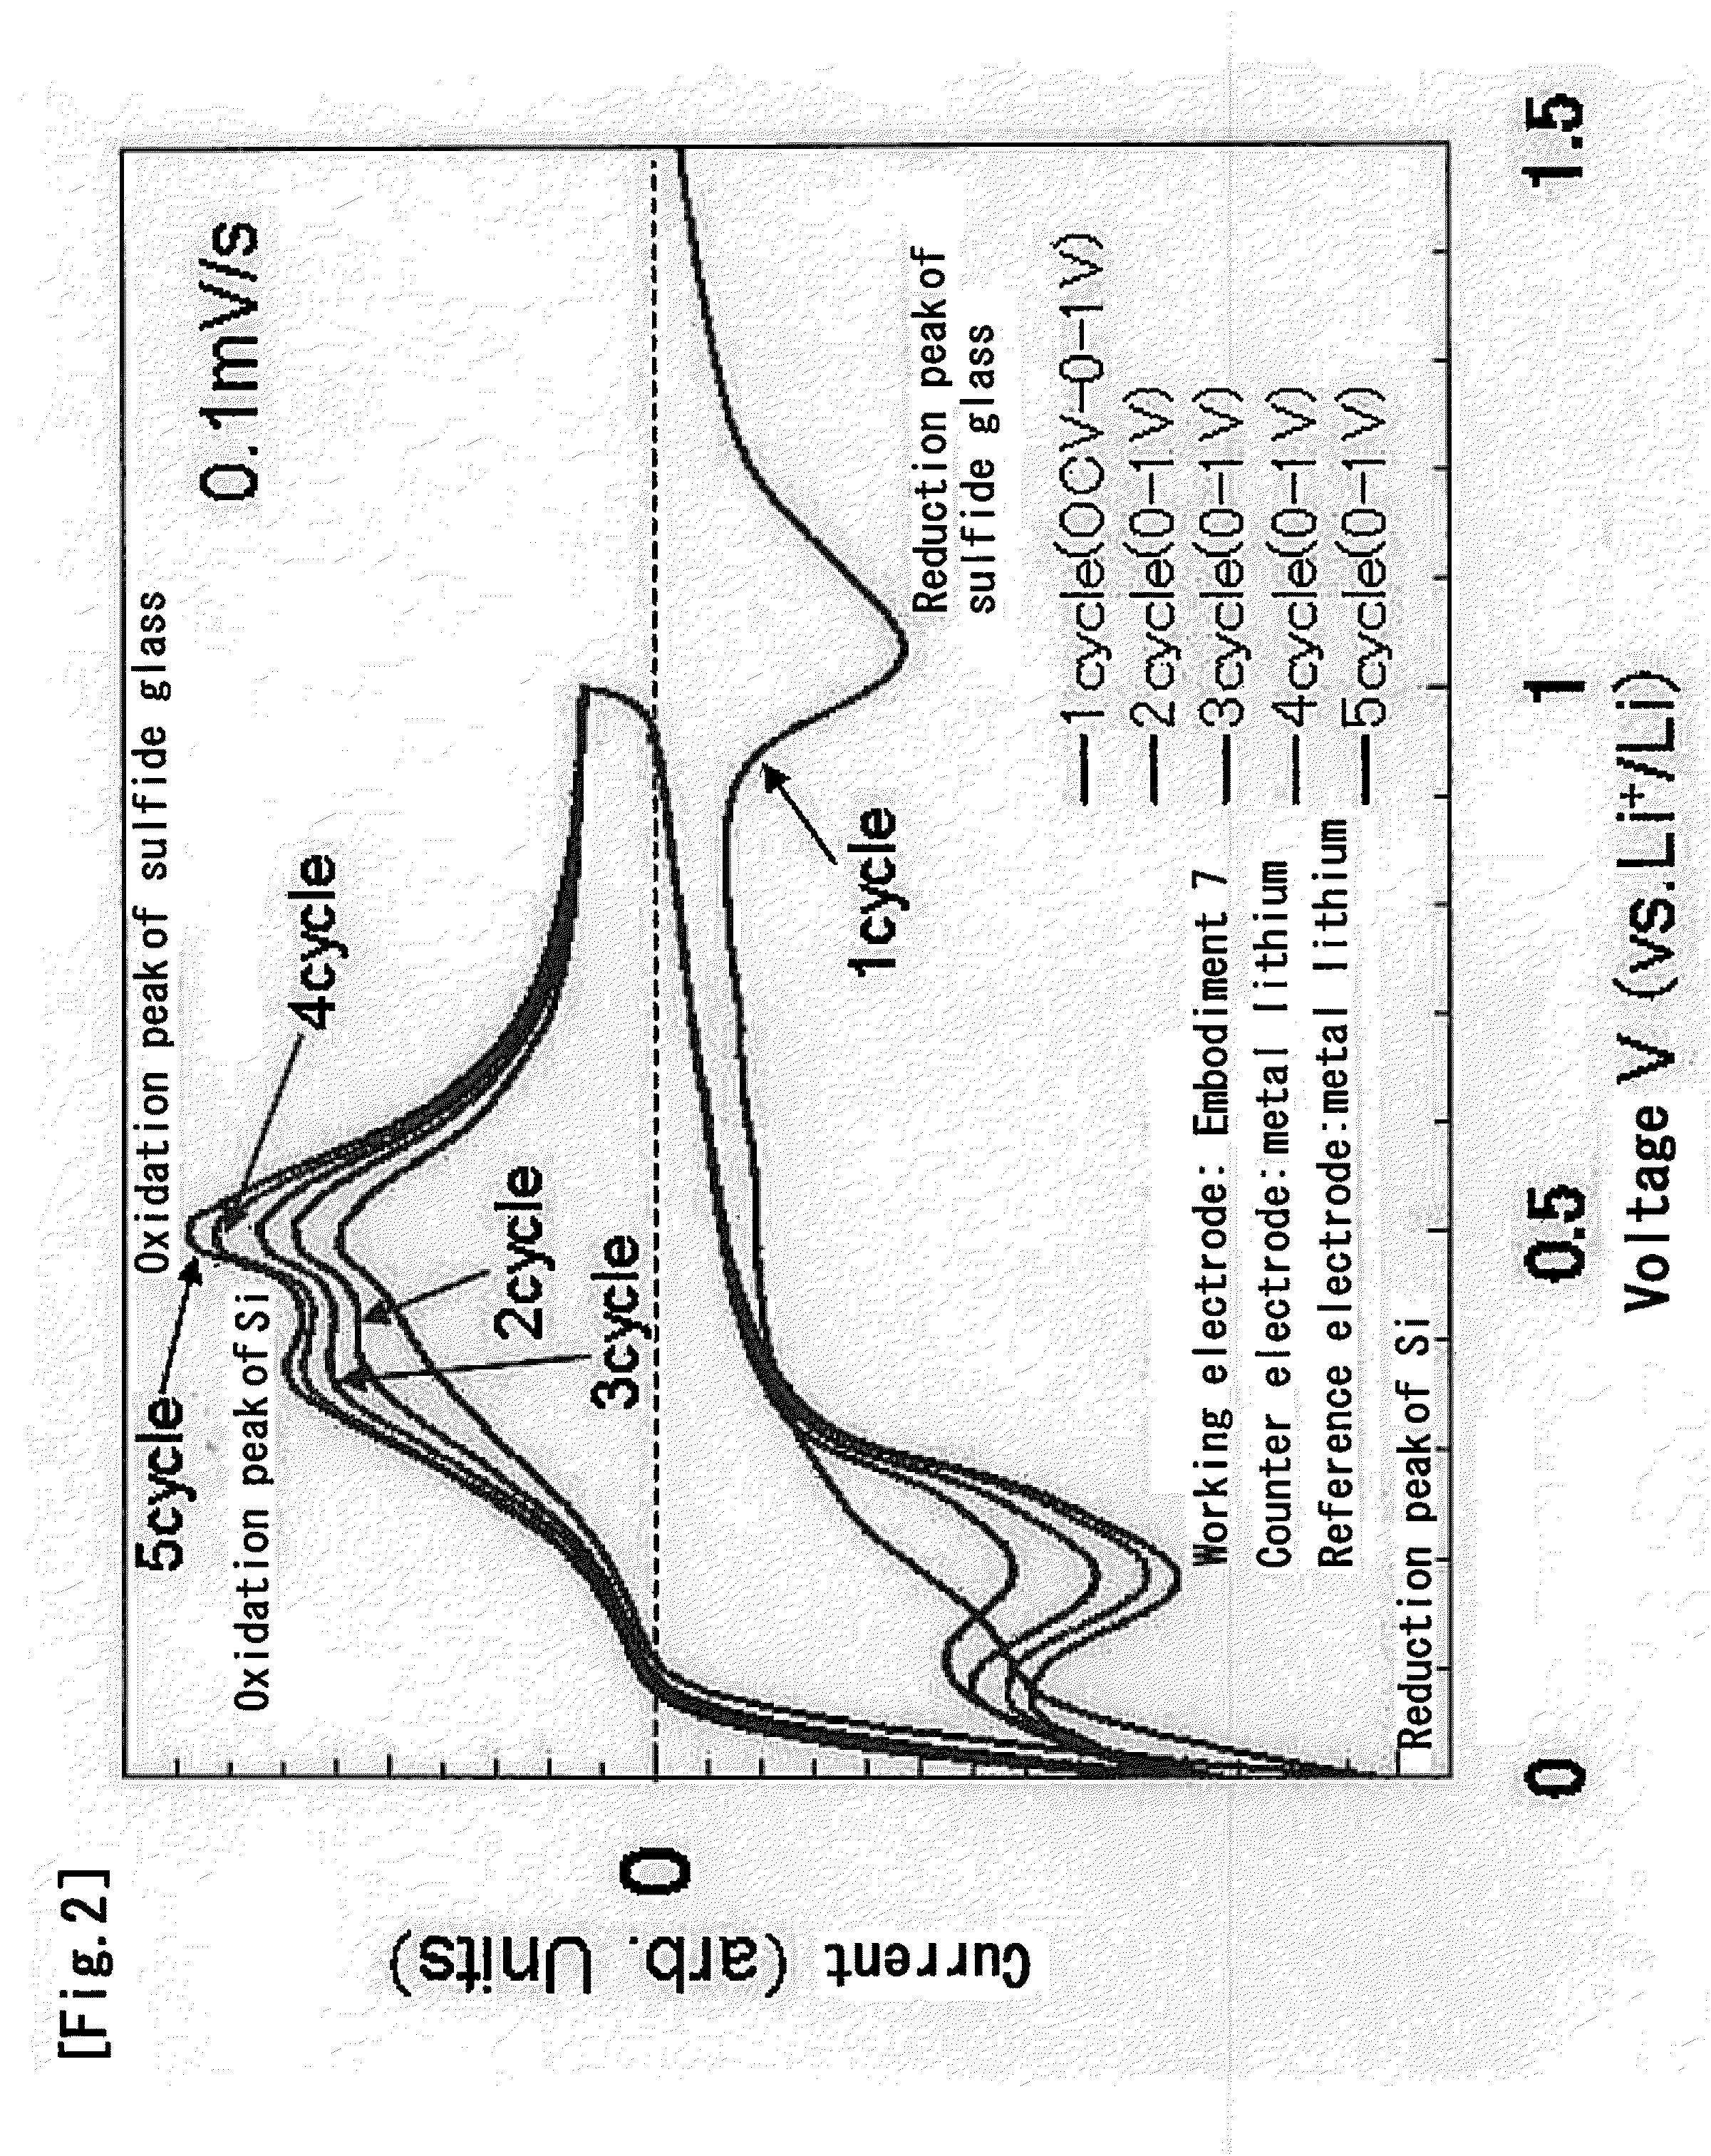 Negative Electrode Material for Lithium Secondary Battery and its Manufacturing Method, and Negative Electrode for Lithium Secondary Battery, and Lithium Secondary Battery